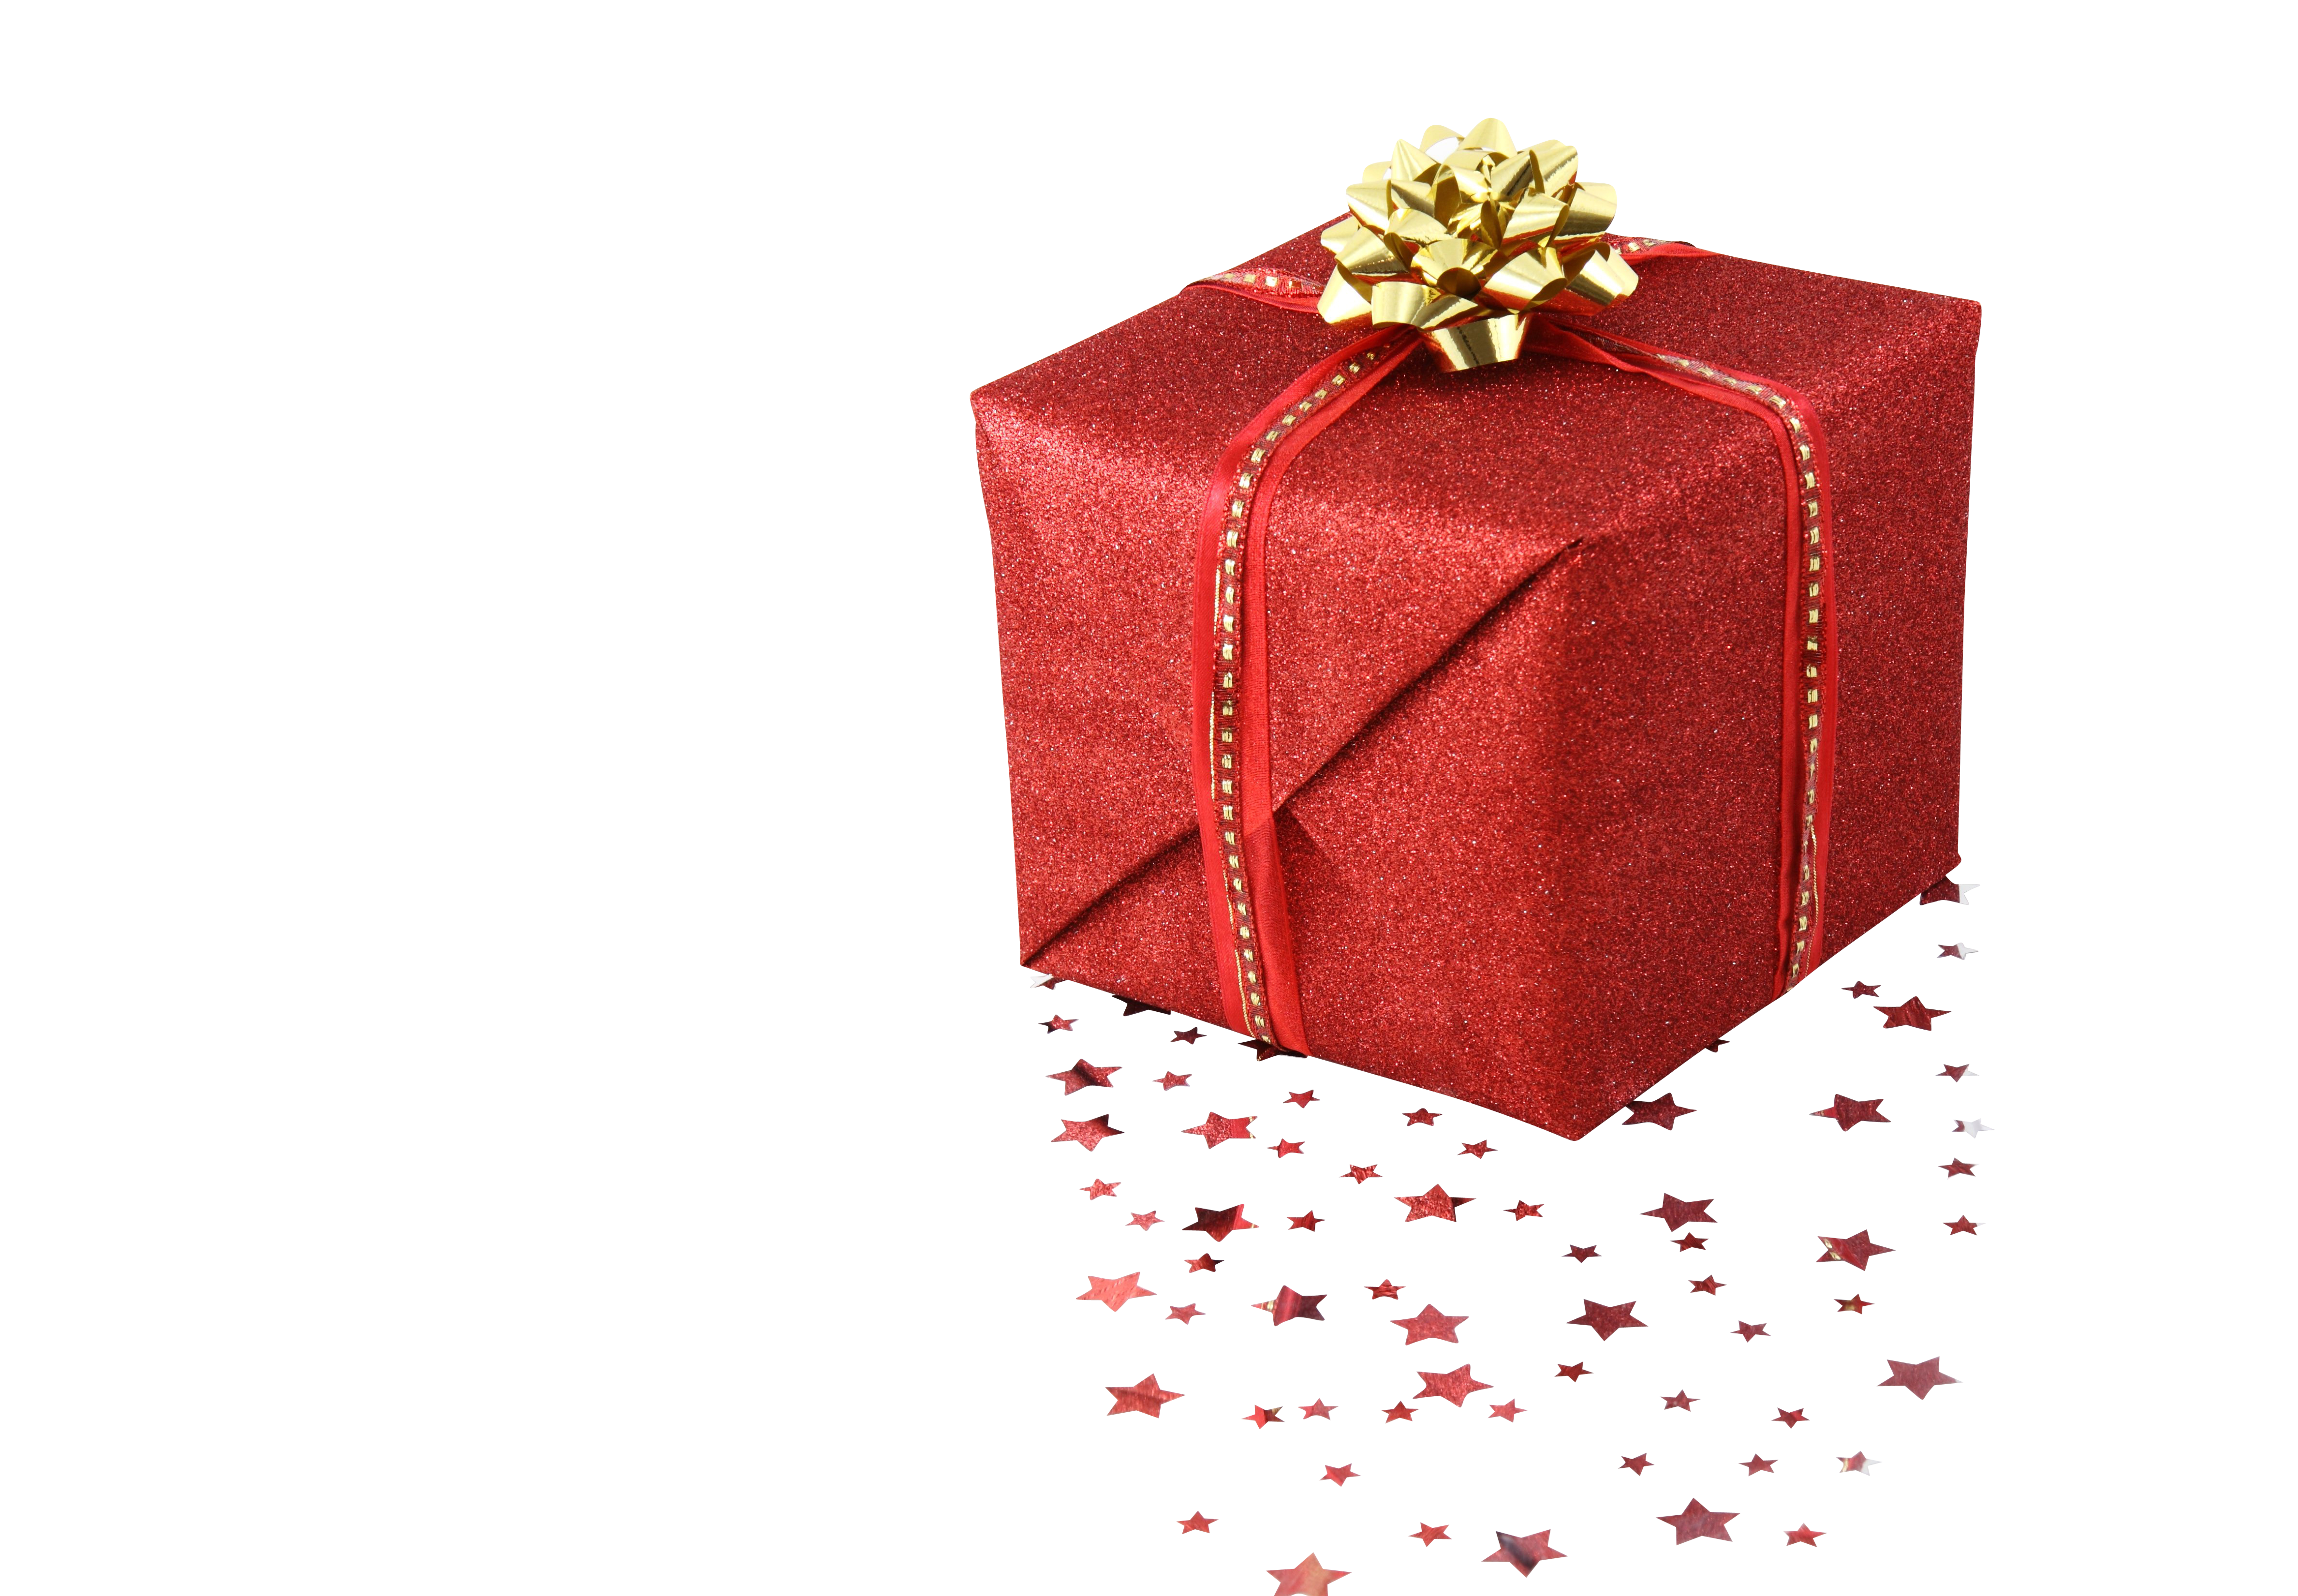 A Red Gift Box With A Gold Bow